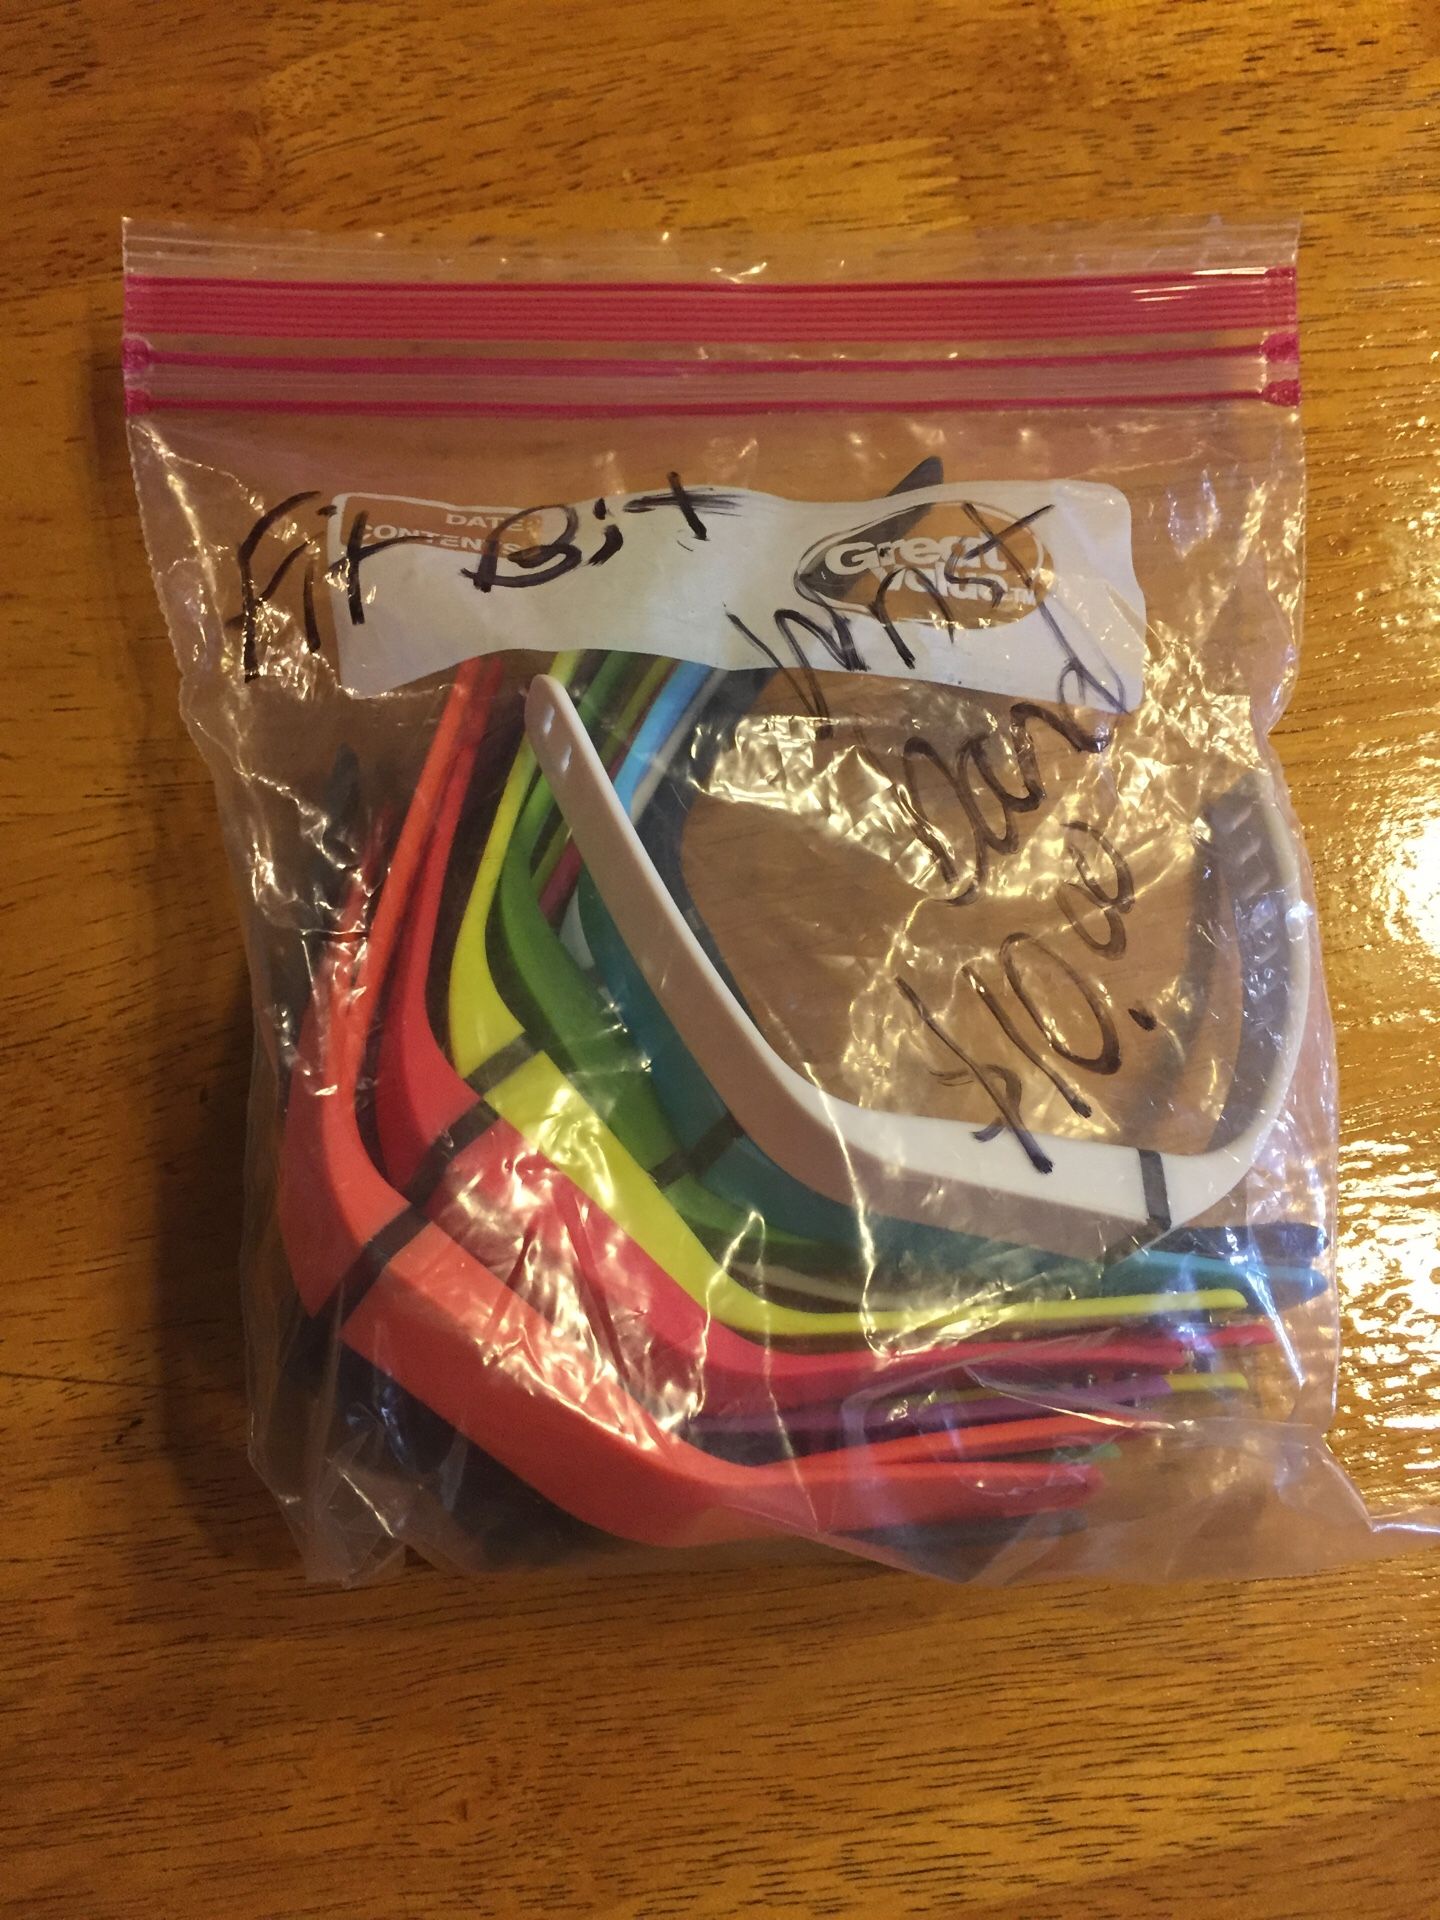 Fitbit flex wristbands large $10 for all